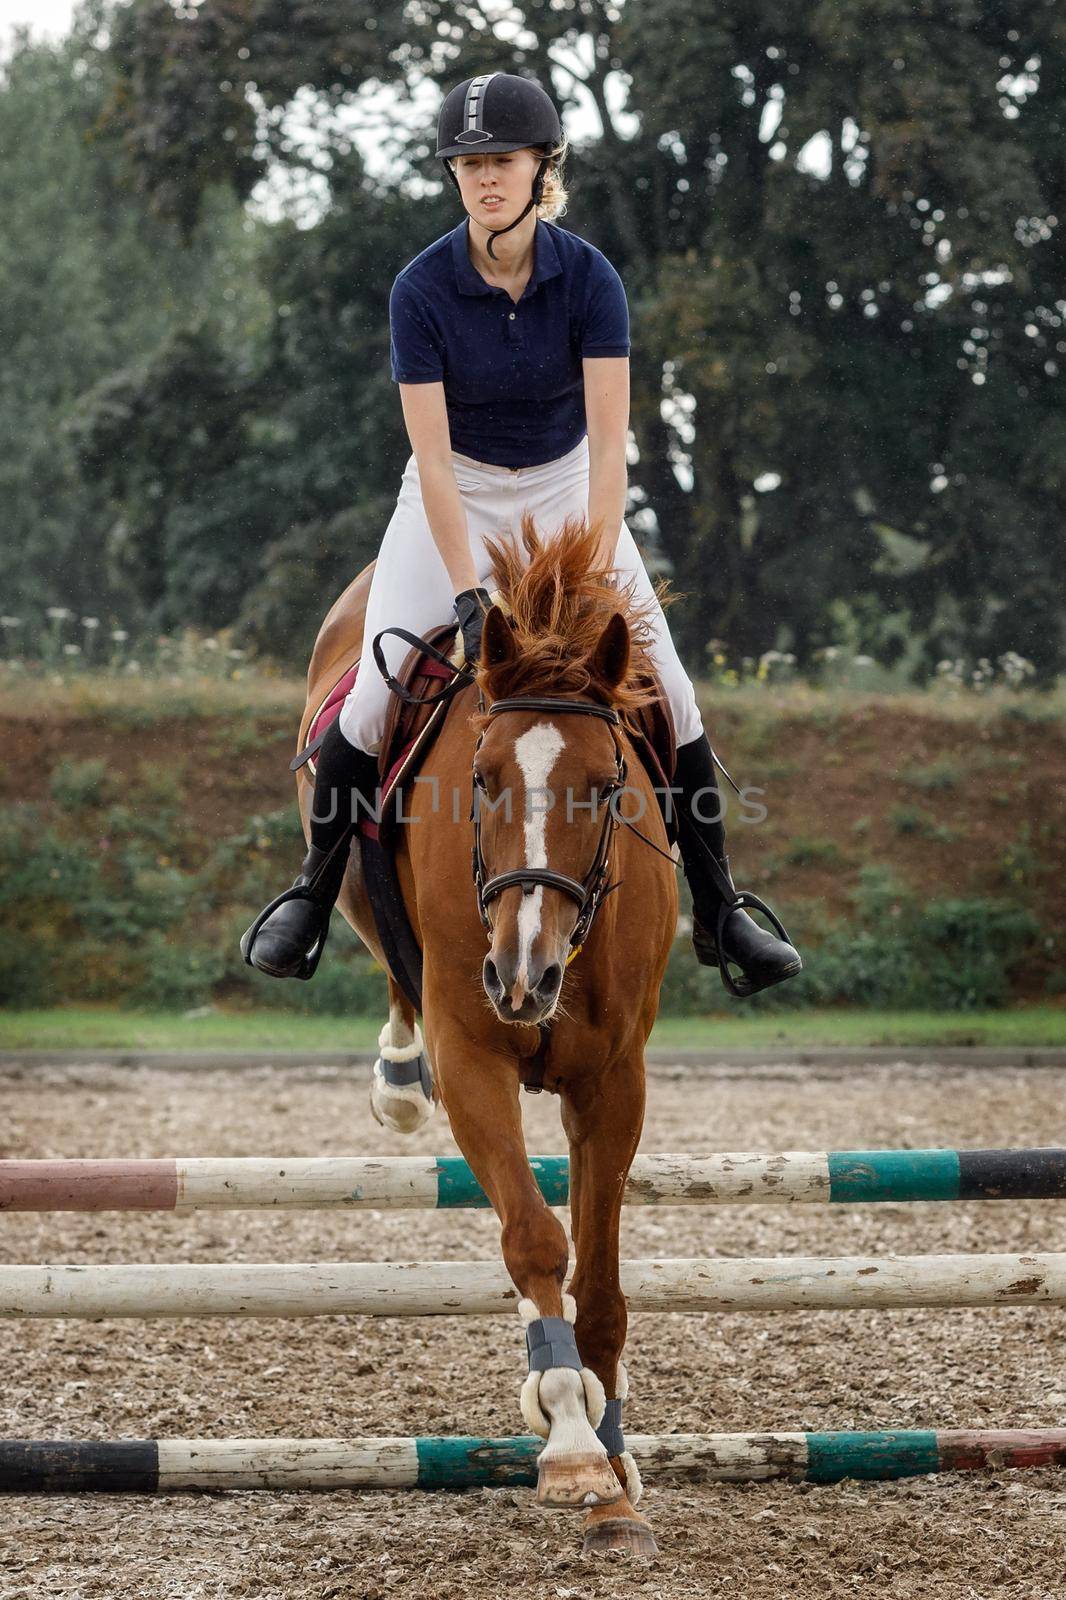 Equestrian jumper - young girl jumping with cherry-brown horse. A horse and rider in jump motion, in the air, equestrian competition in the rain.